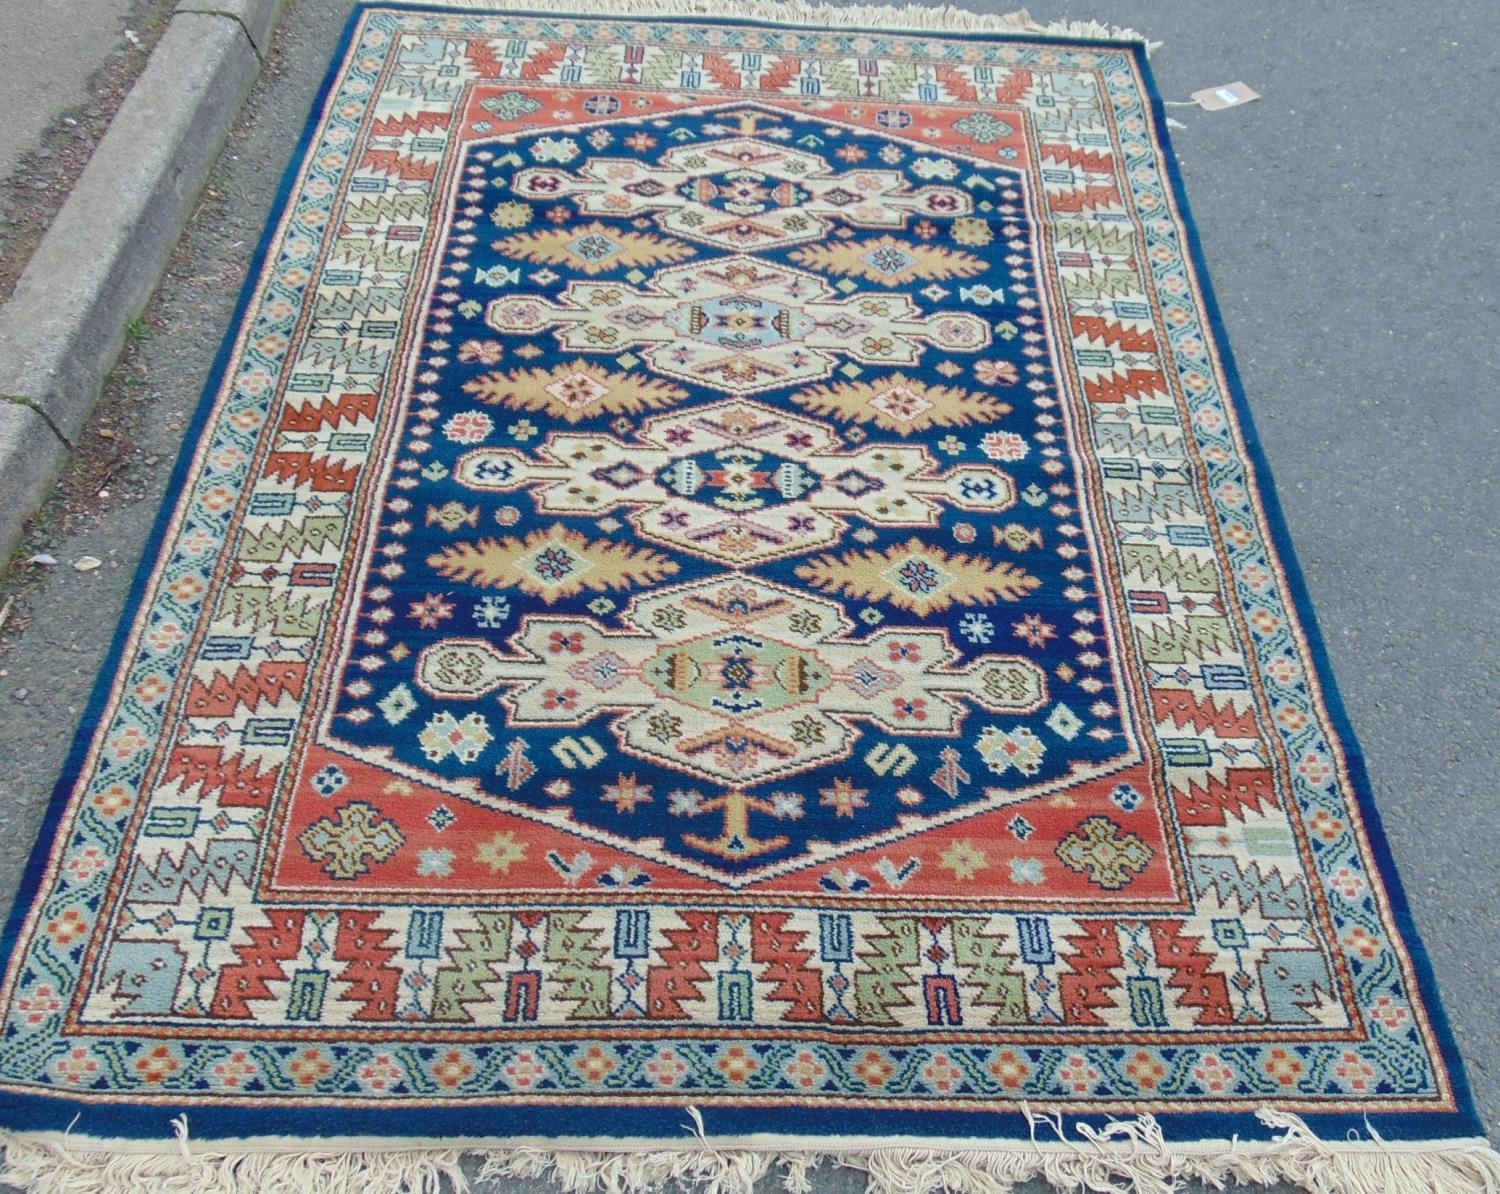 A Kazak design rug with four stepped medallions and geometric borders, 200 mx 140 cm approximately